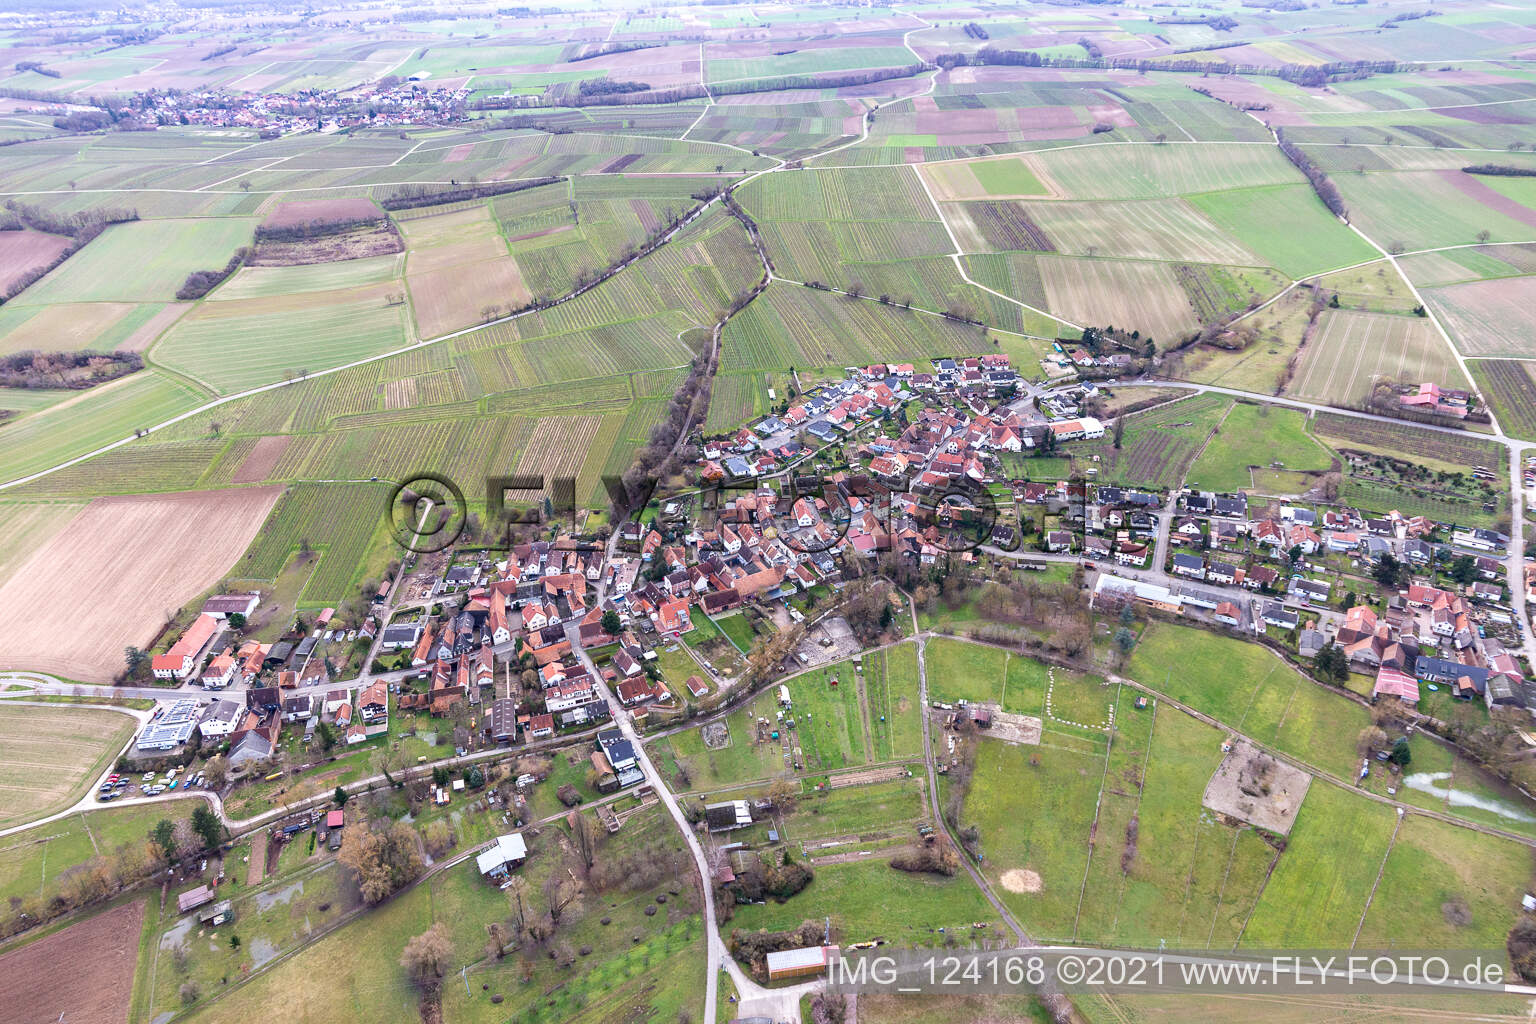 Oberhausen in the state Rhineland-Palatinate, Germany seen from a drone